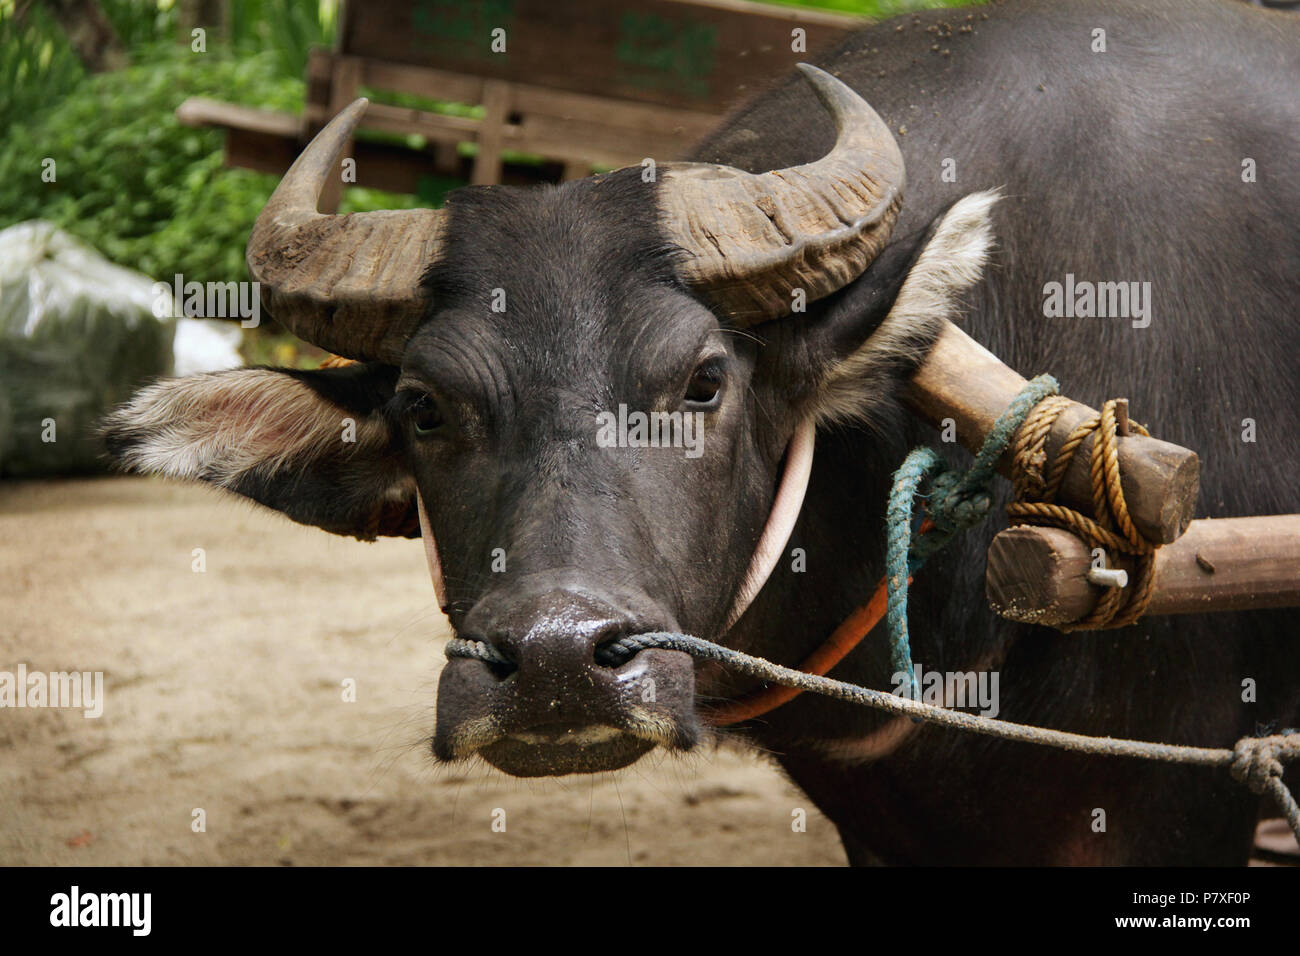 Ox Philippines High Resolution Stock Photography and Images - Alamy